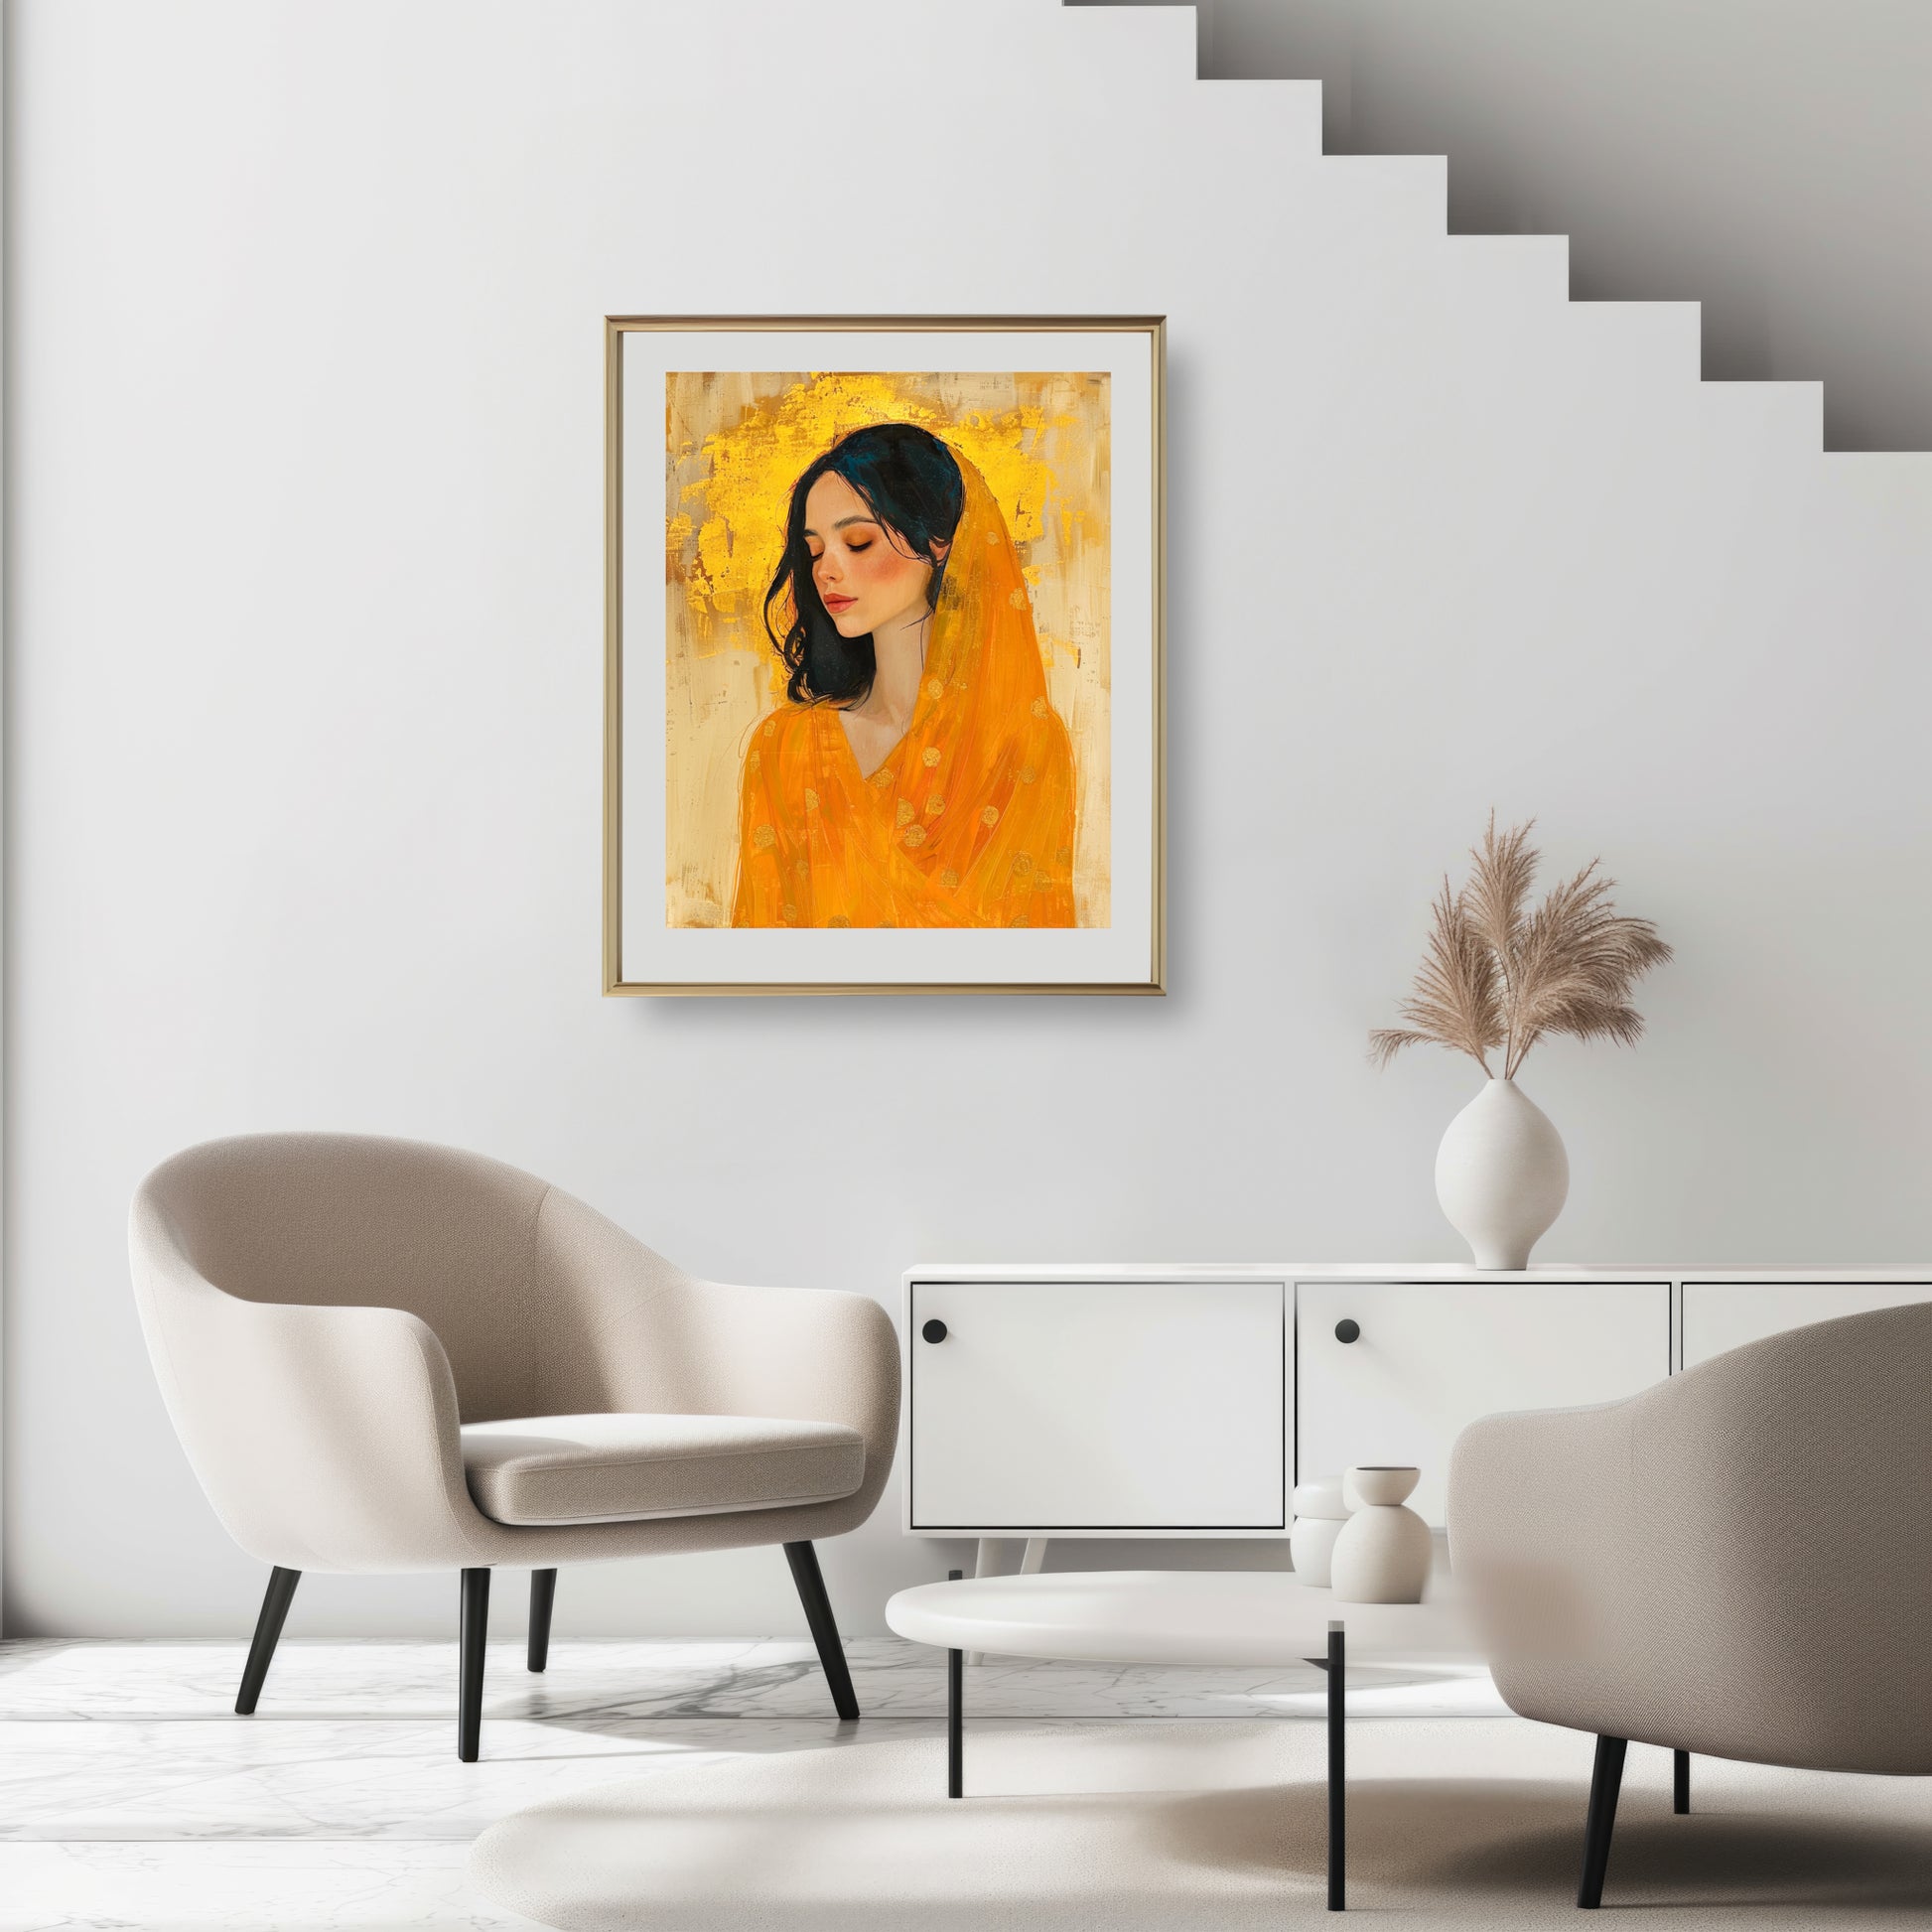 Framed fine art print depicting a woman with dark hair and a golden veil from the Heart Of Gold collection.